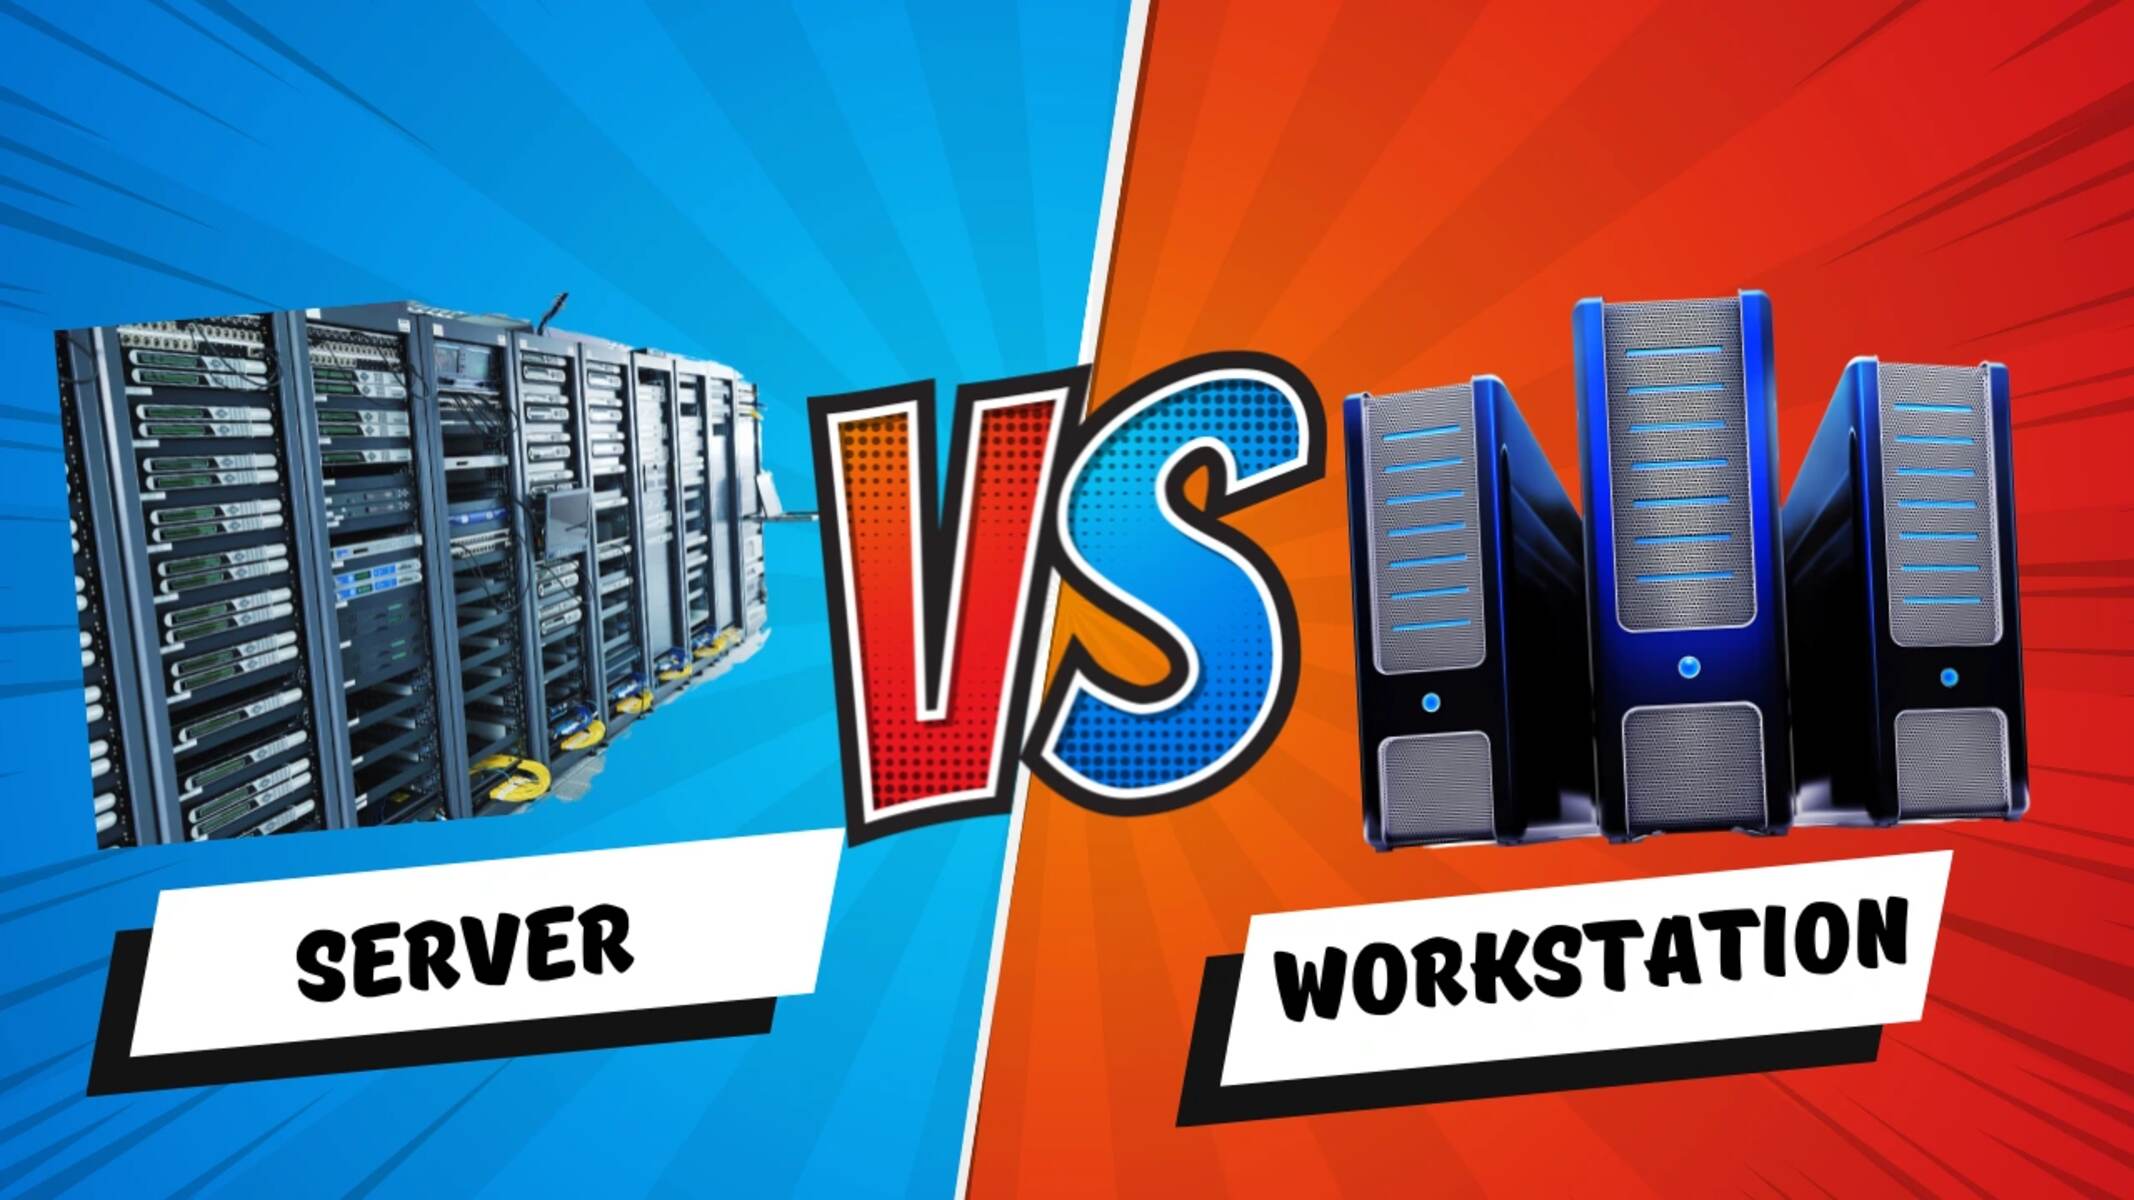 What Is Workstation And Server